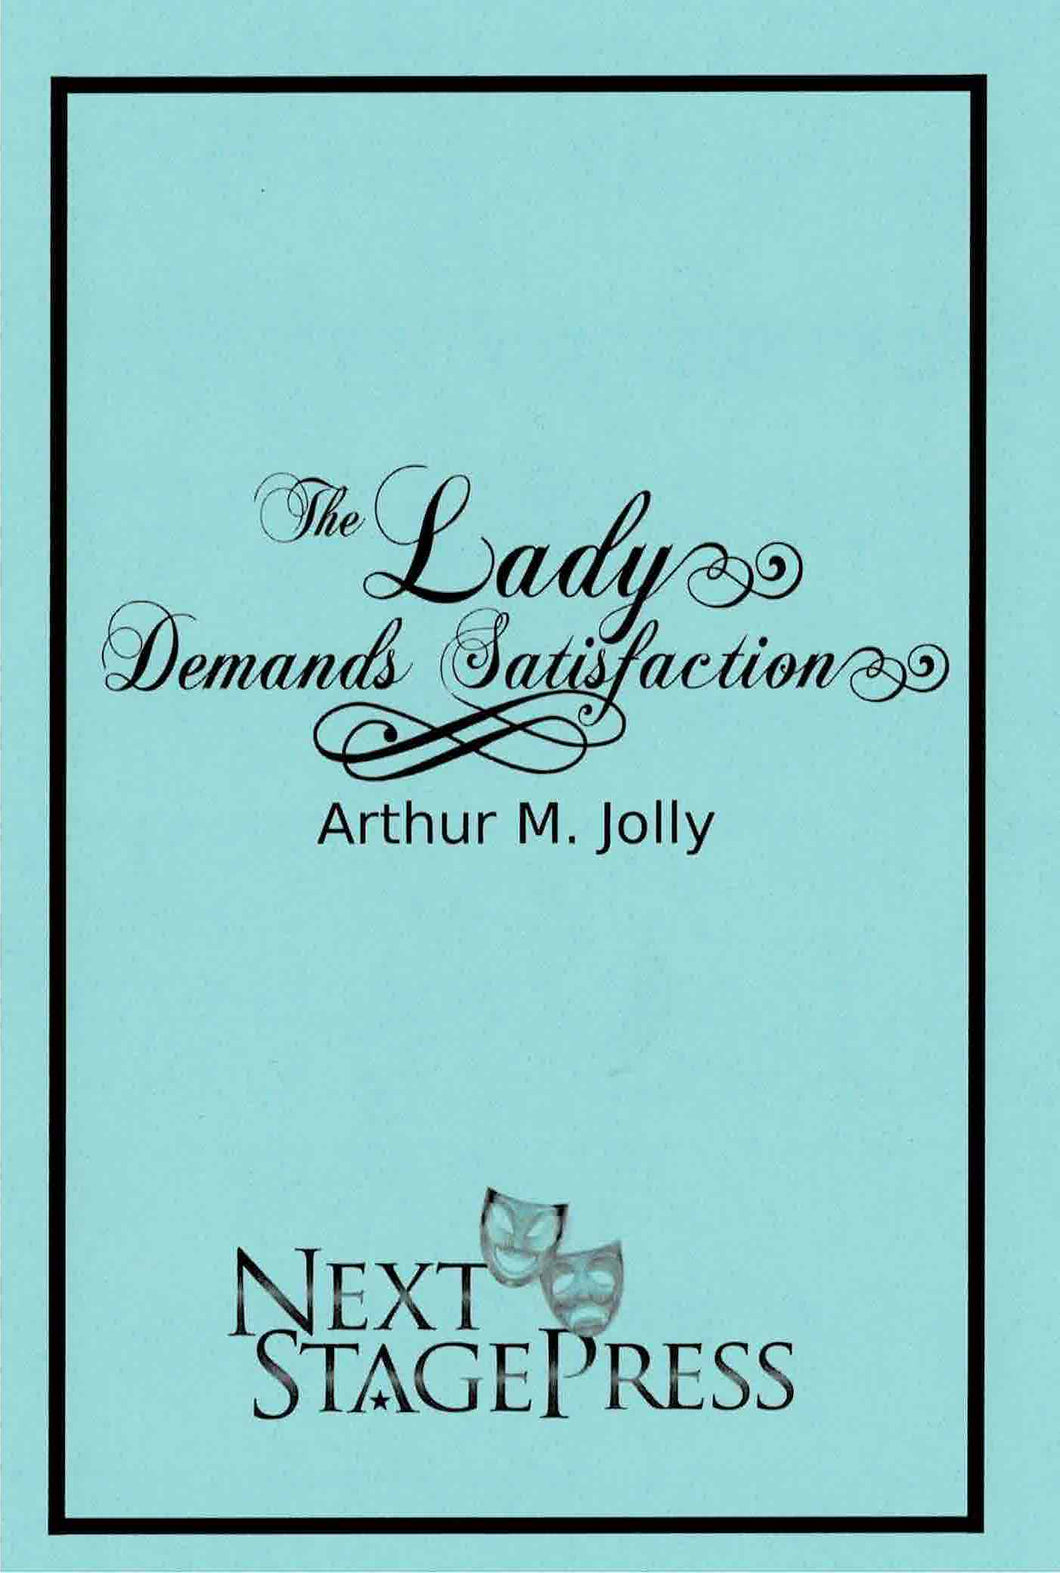 The Lady Demands Satisfaction by Arthur M. Jolly